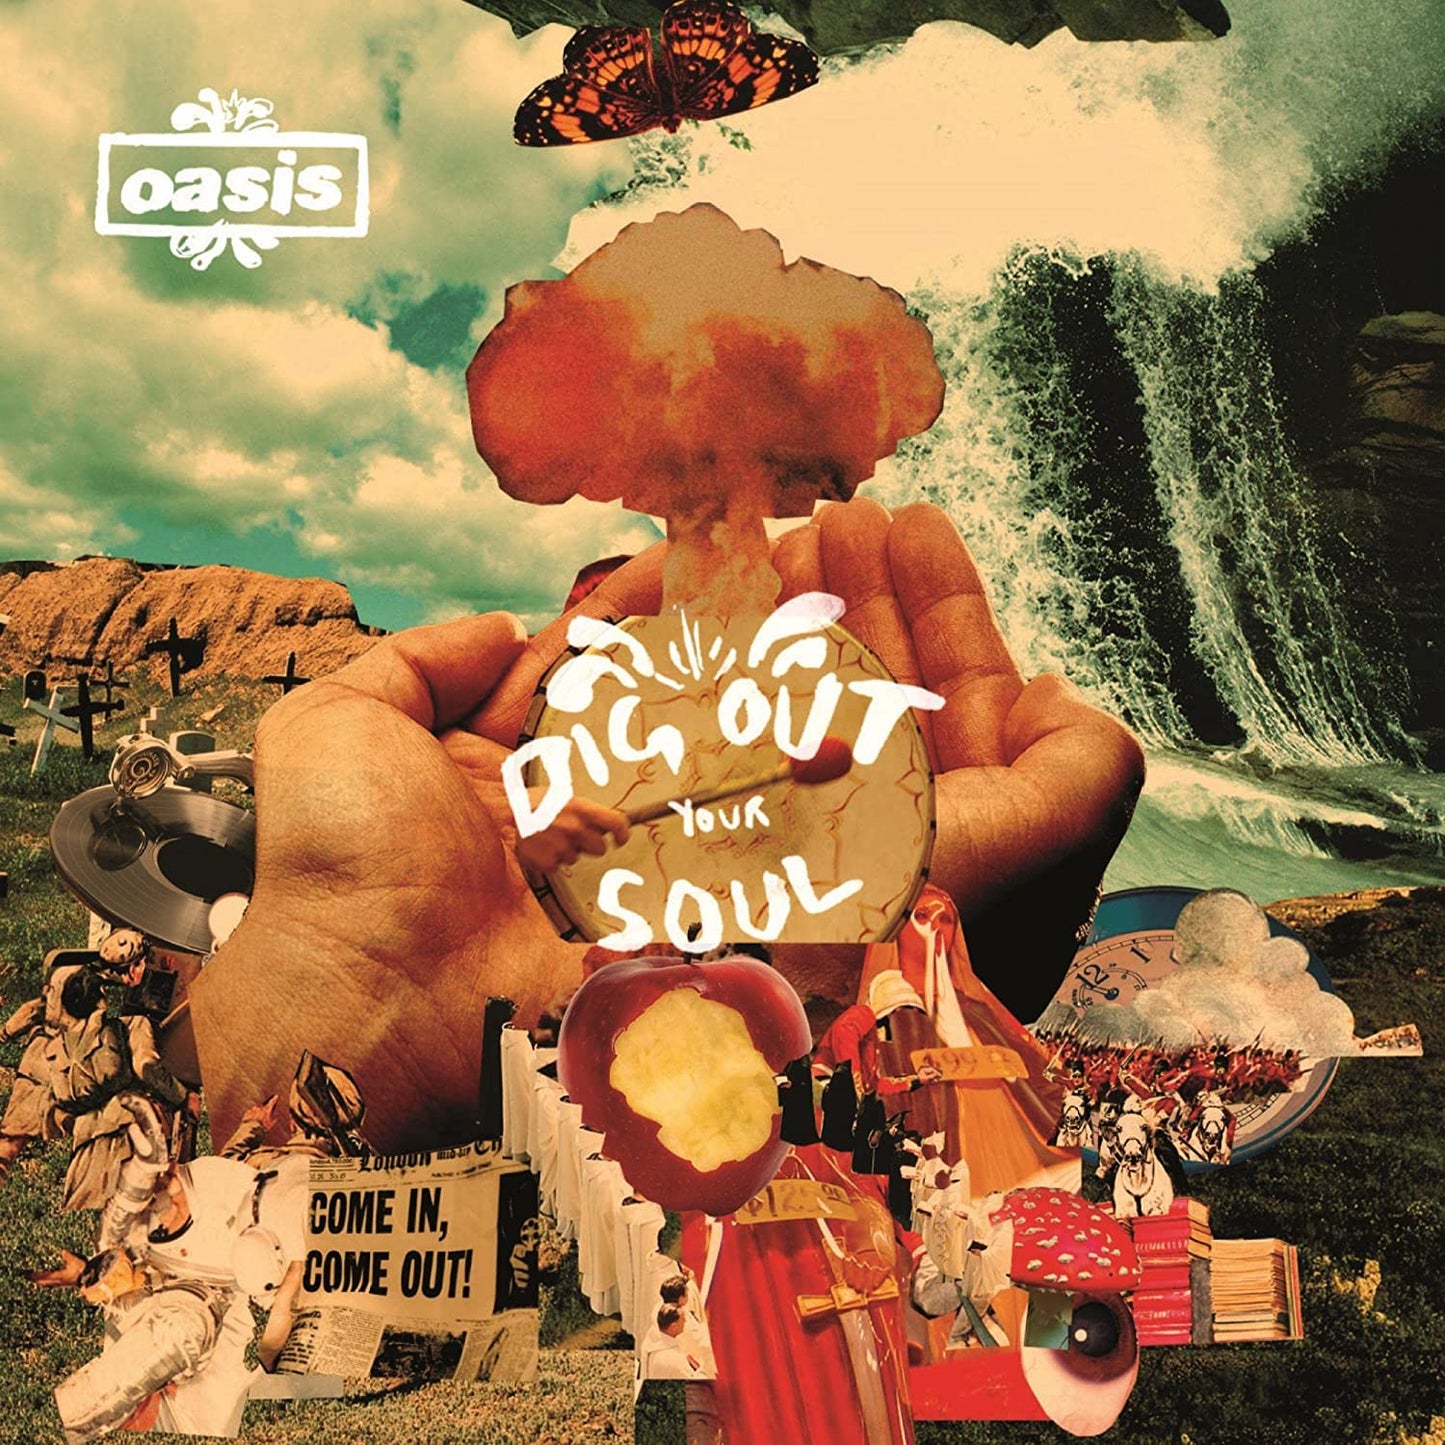 Oasis Dig Out Your Soul